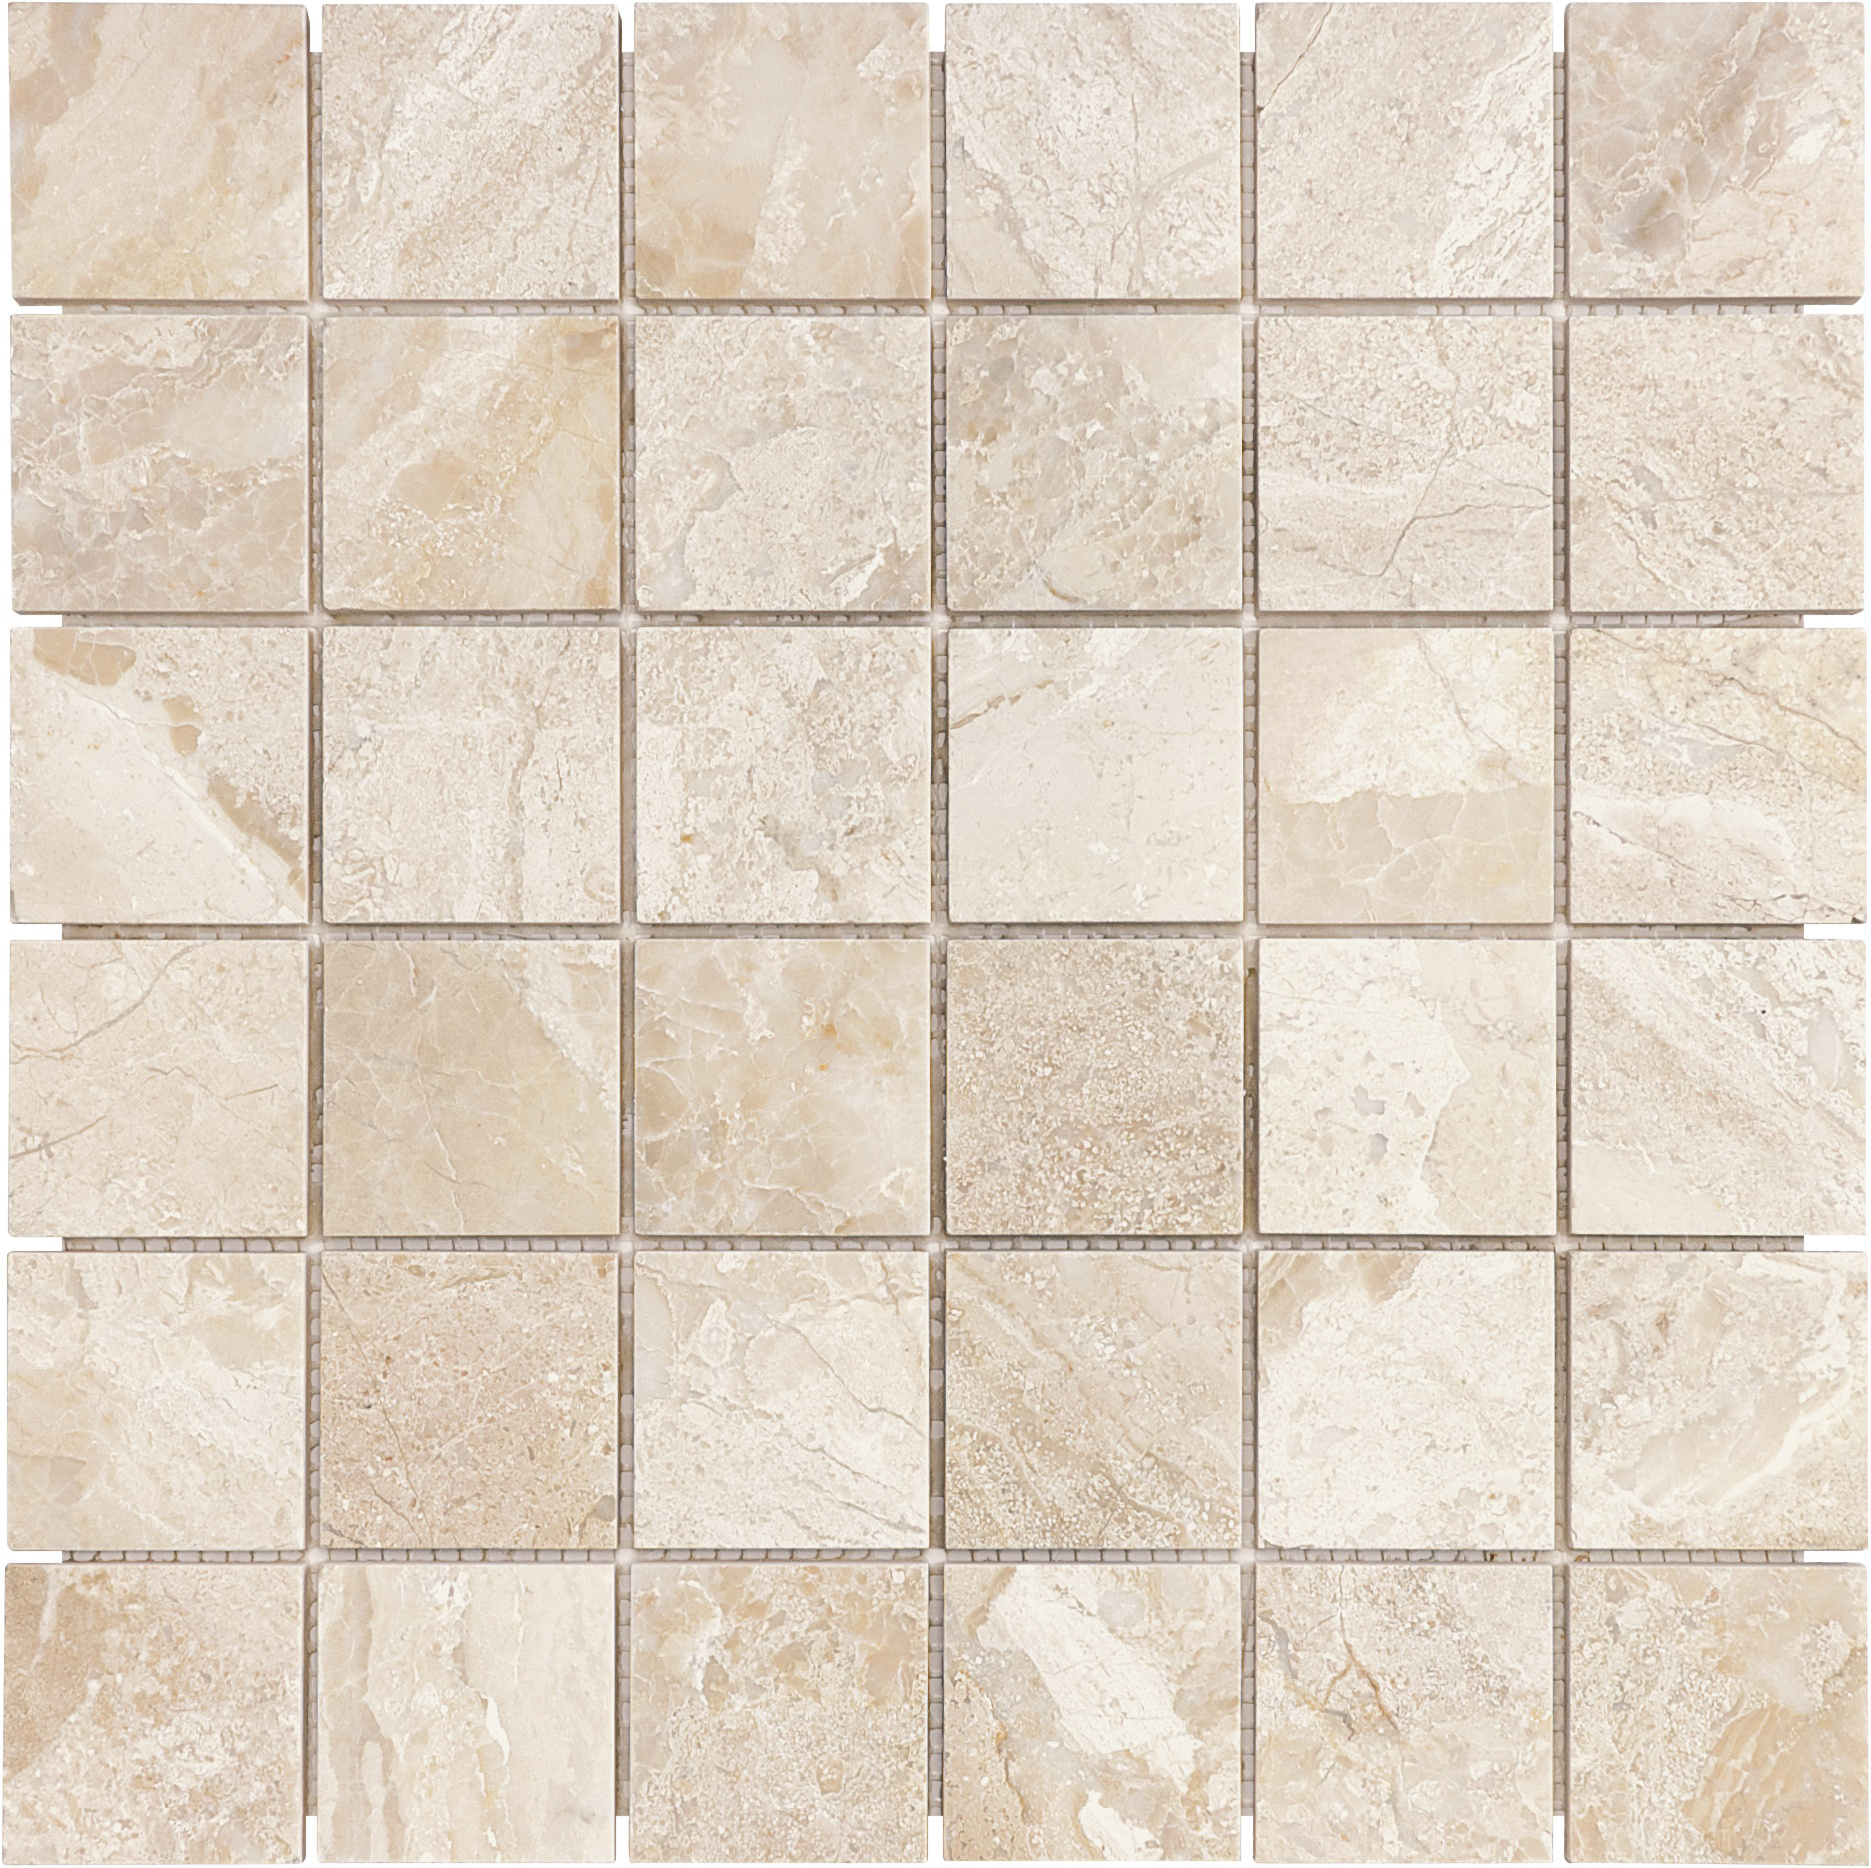 marble straight stack 2x2-inch pattern natural stone mosaic from impero reale anatolia collection distributed by surface group international honed finish straight edge edge mesh shape